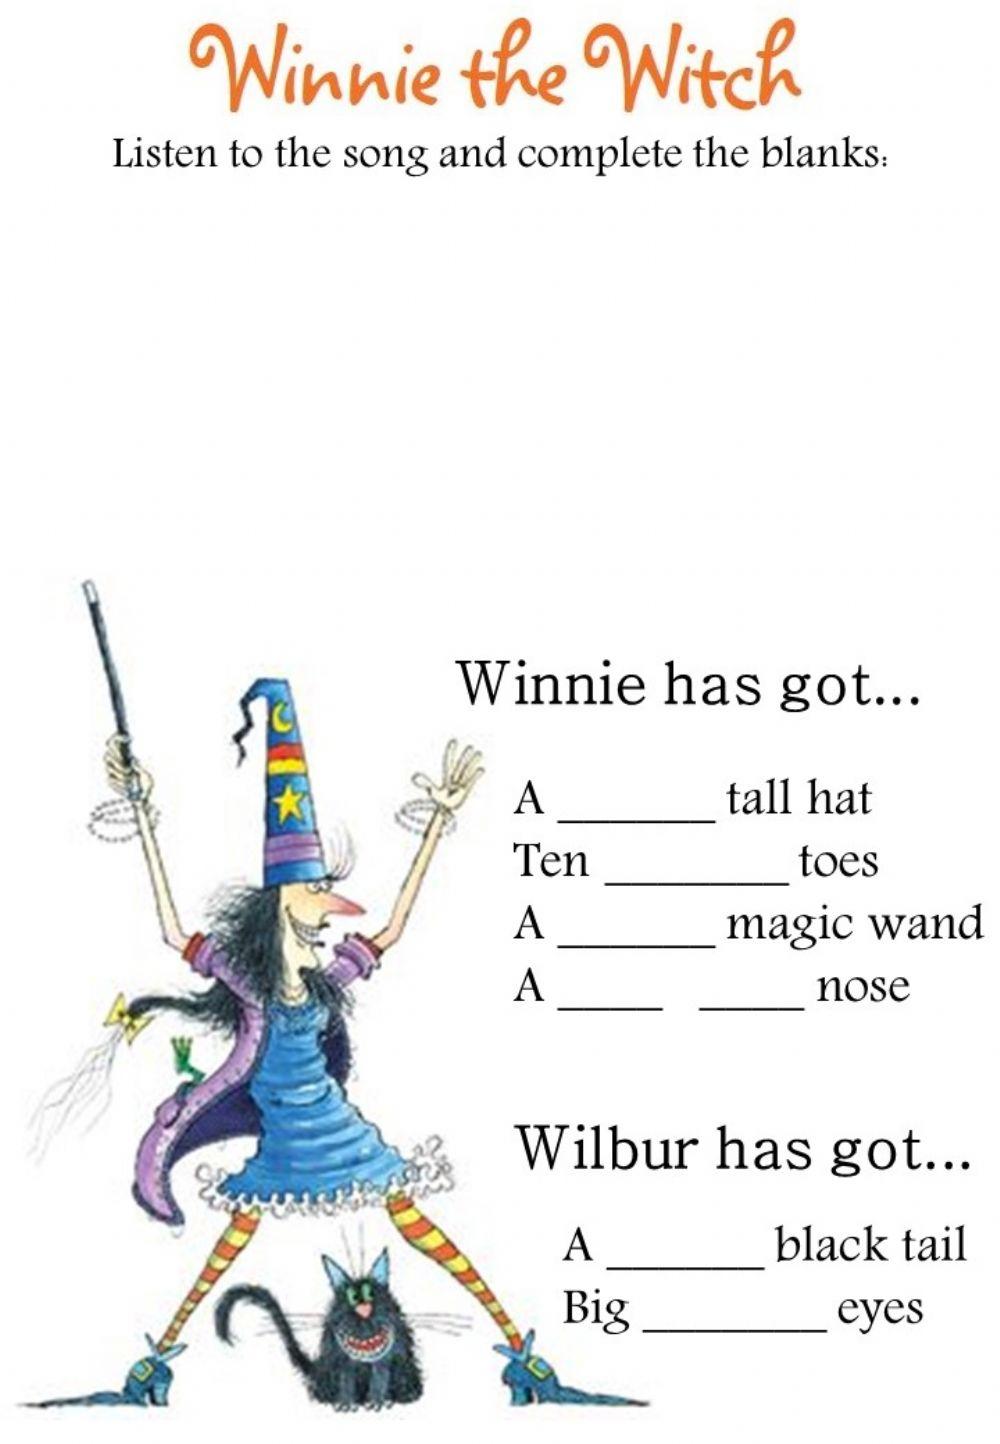 Winnie's song exercise